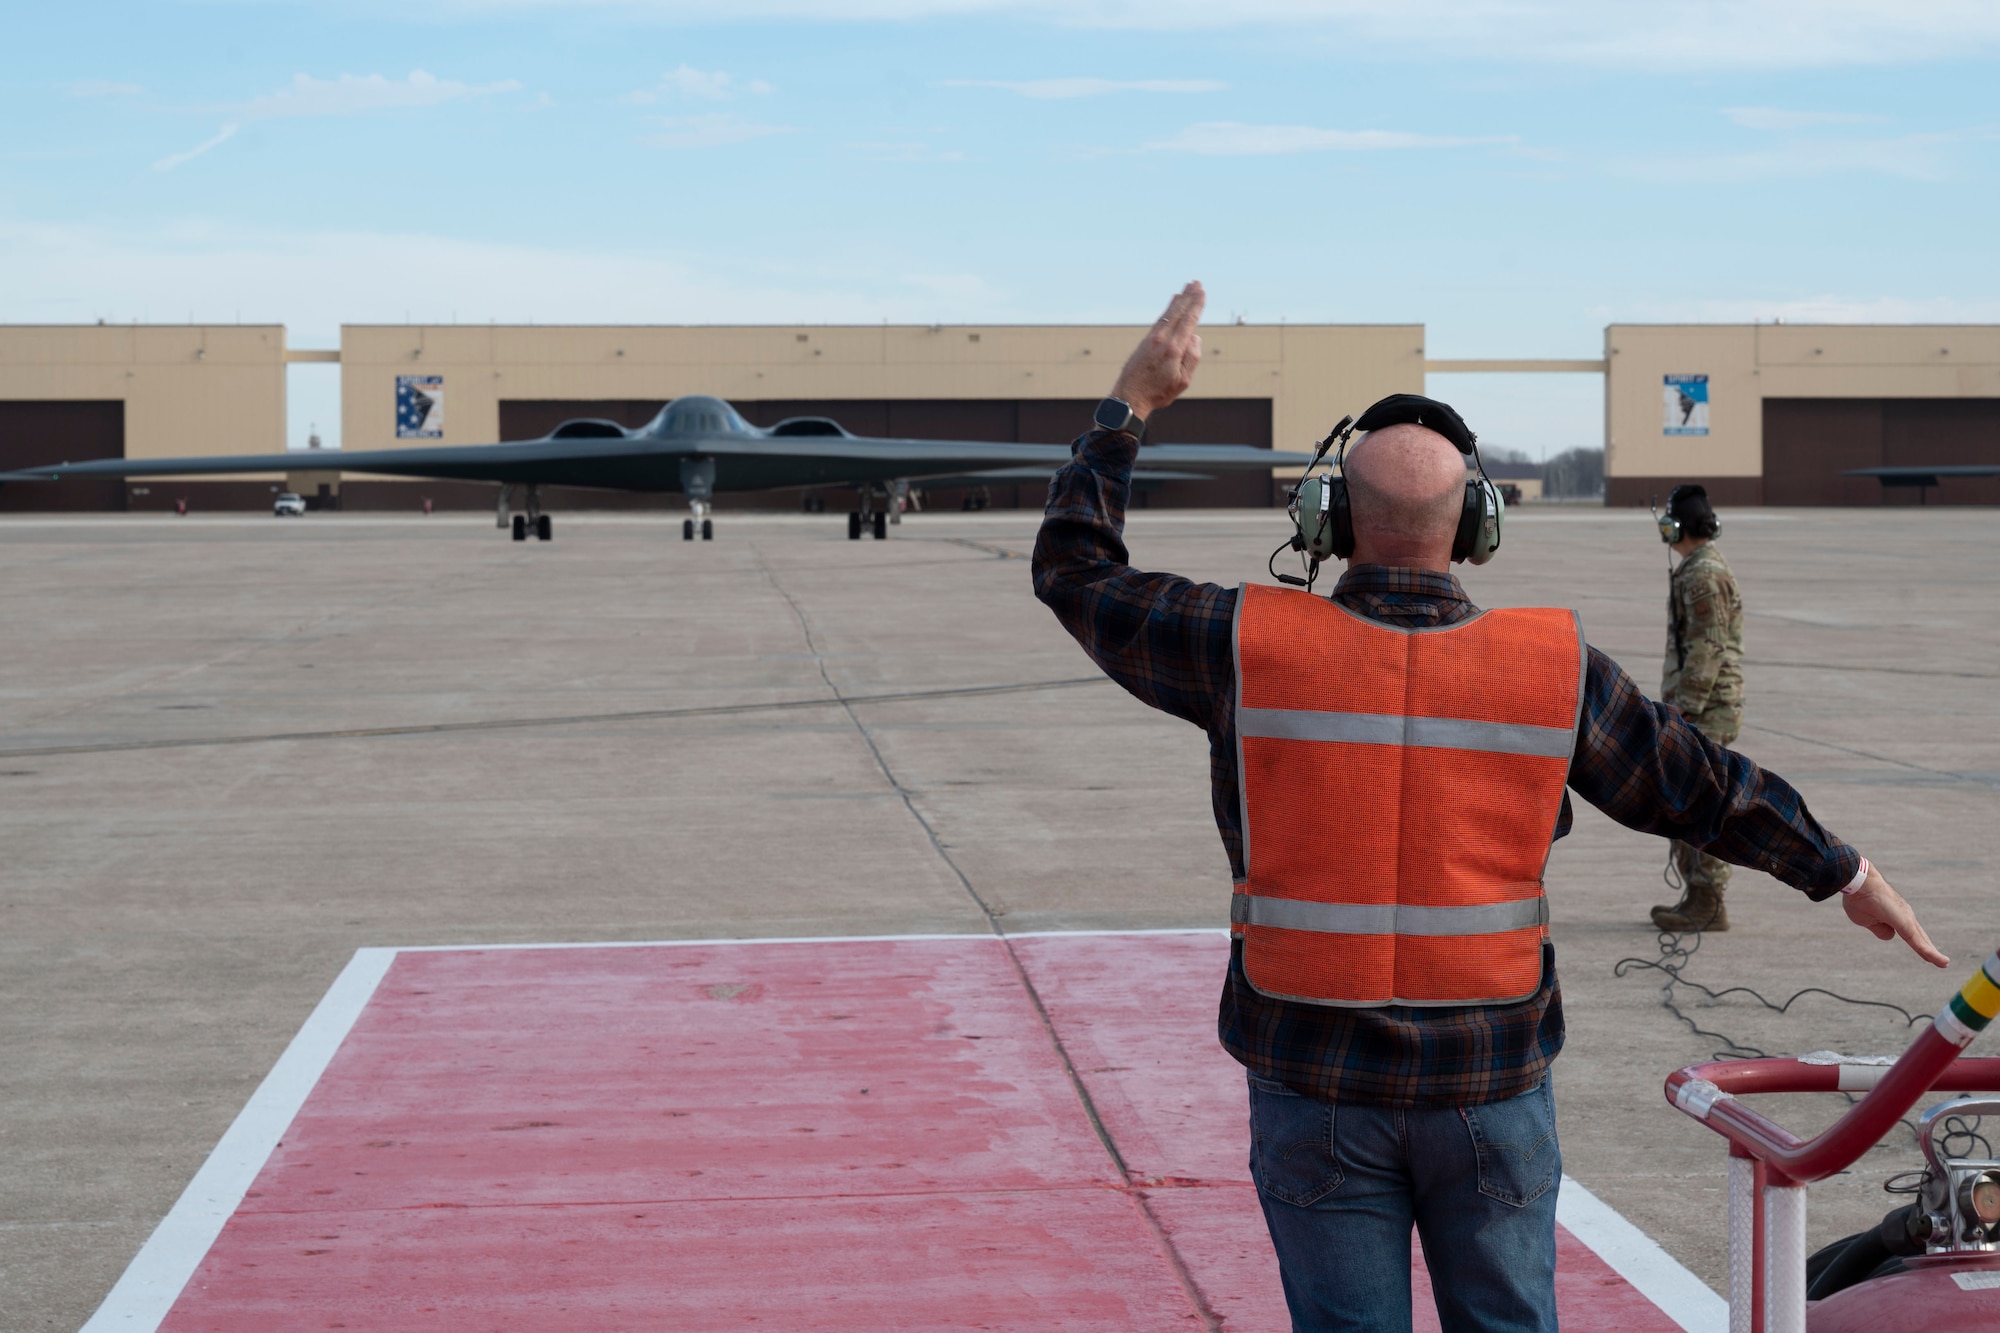 Retired U.S. Air Force Senior Master Sgt. Keith Meadows, marshals in a B-2 Spirit stealth bomber during a ceremony at Whiteman Air Force Base, Mo., Dec. 15, 2023. As a Staff Sgt. at the time, Meadows marshalled the B-2 for its first arrival to Whiteman AFB, 30 years ago and performed the same duties during a ceremony honoring that anniversary. (U.S. Air Force photo by Tech. Sgt. Anthony Hetlage)